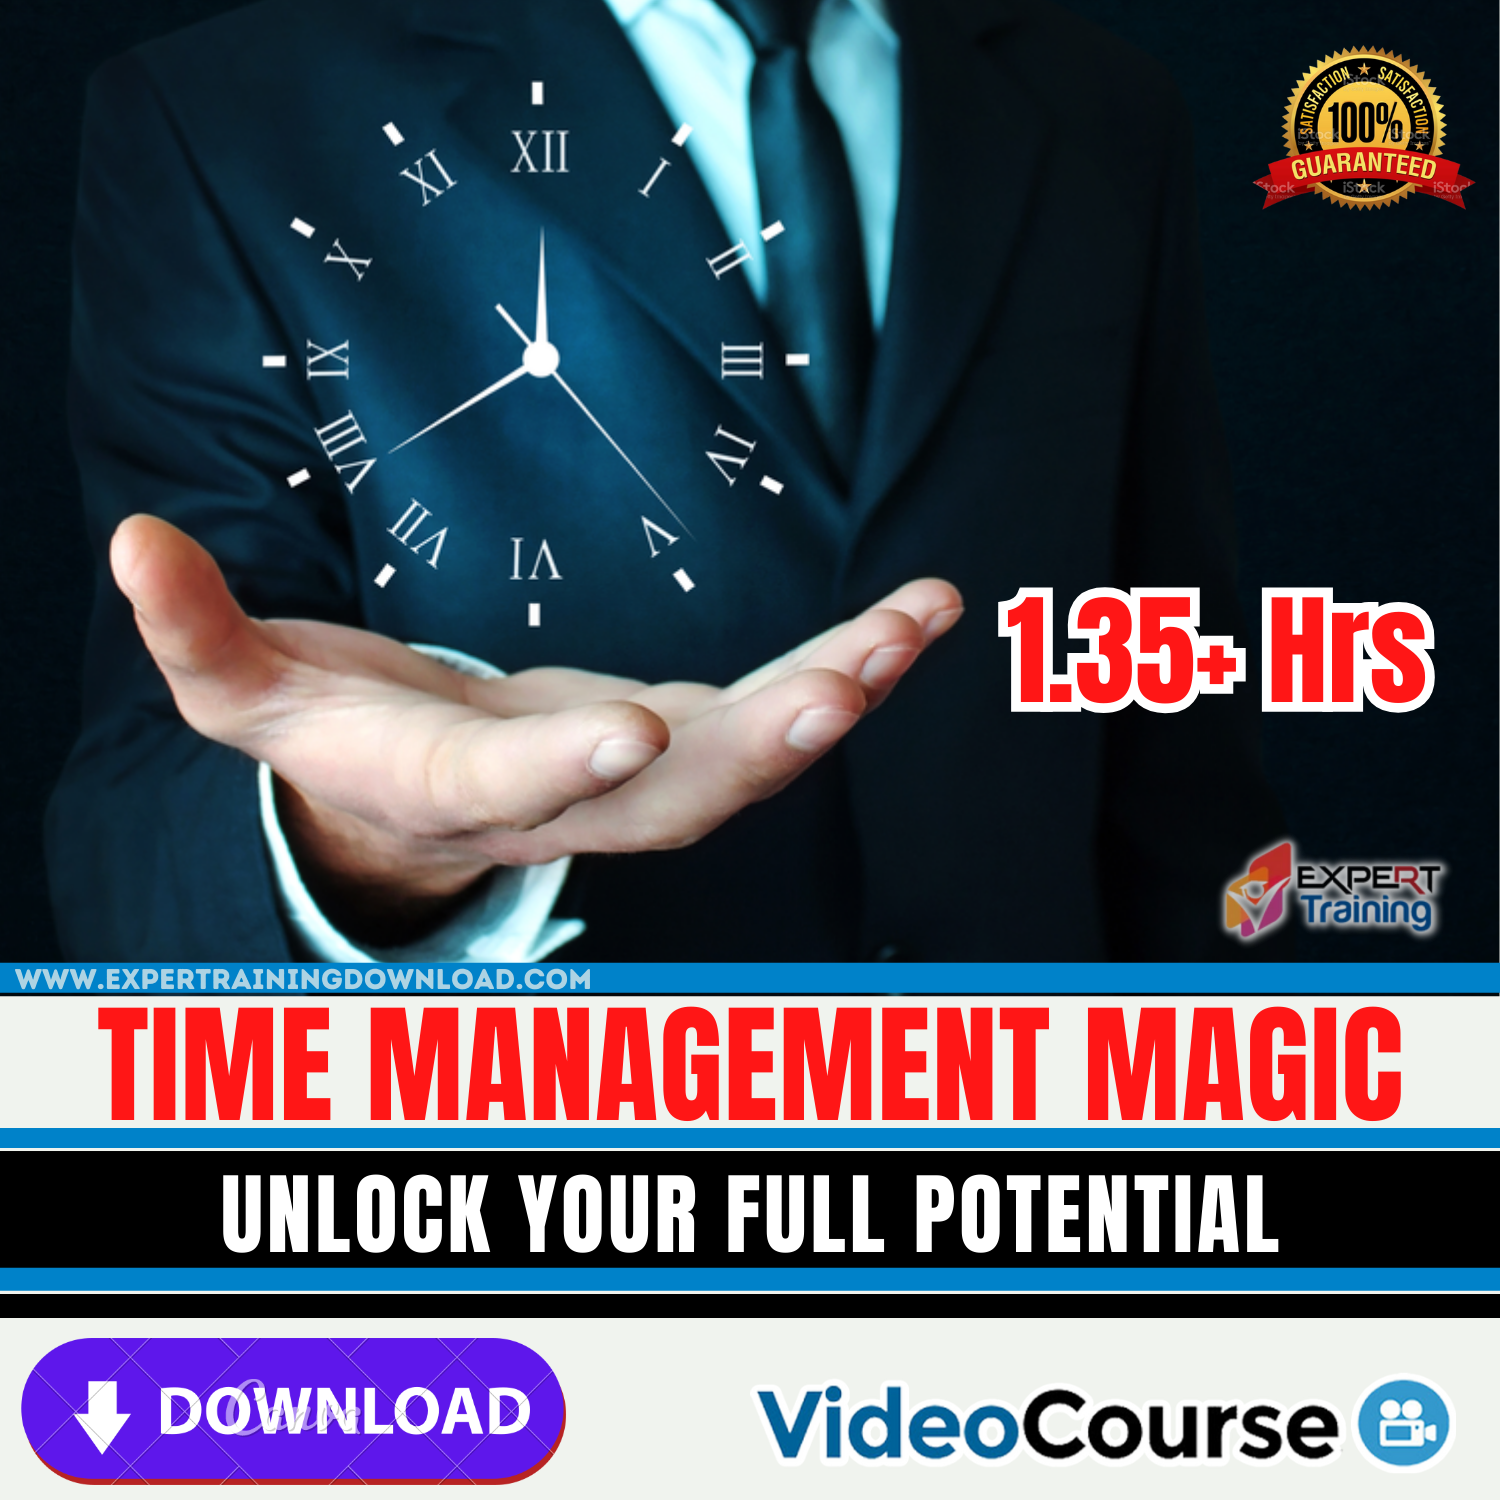 Time Management Magic Unlock Your Full Potential